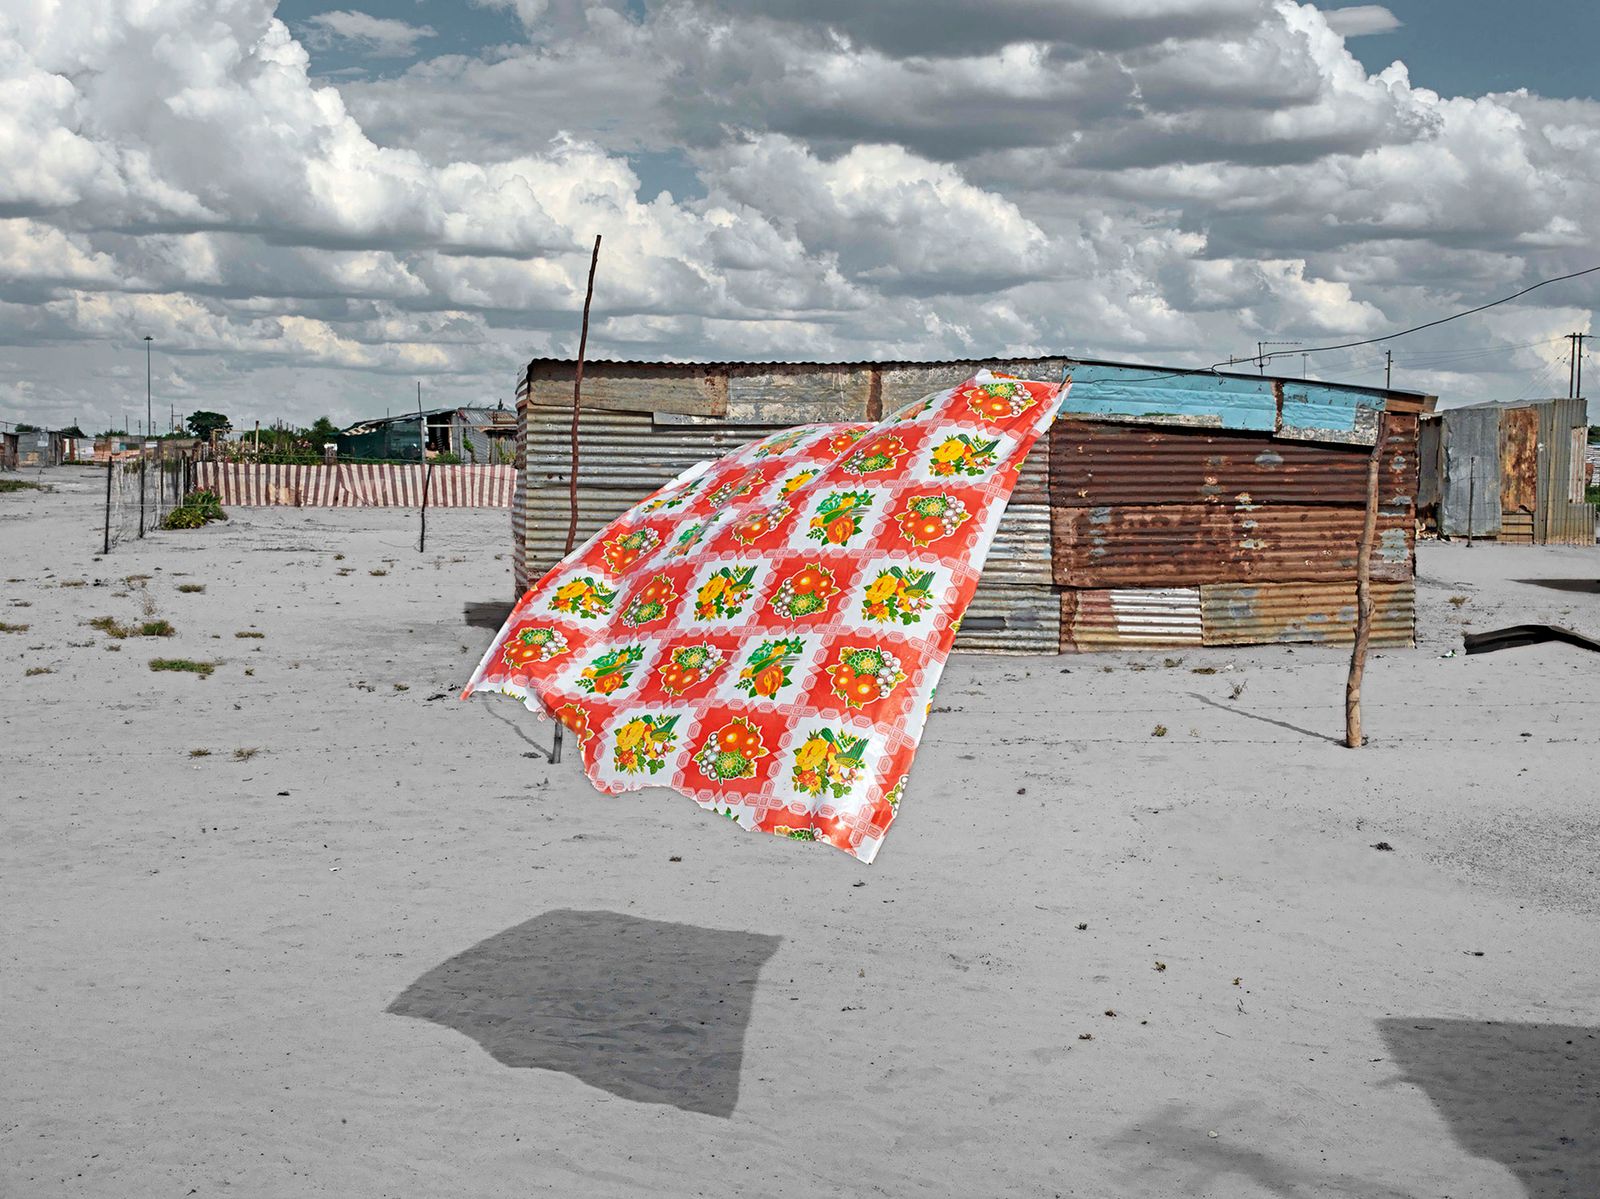 © Graeme Williams - Phutanang township, Kimberley, South Africa. 2011. A torn tablecloth dries in the wind.